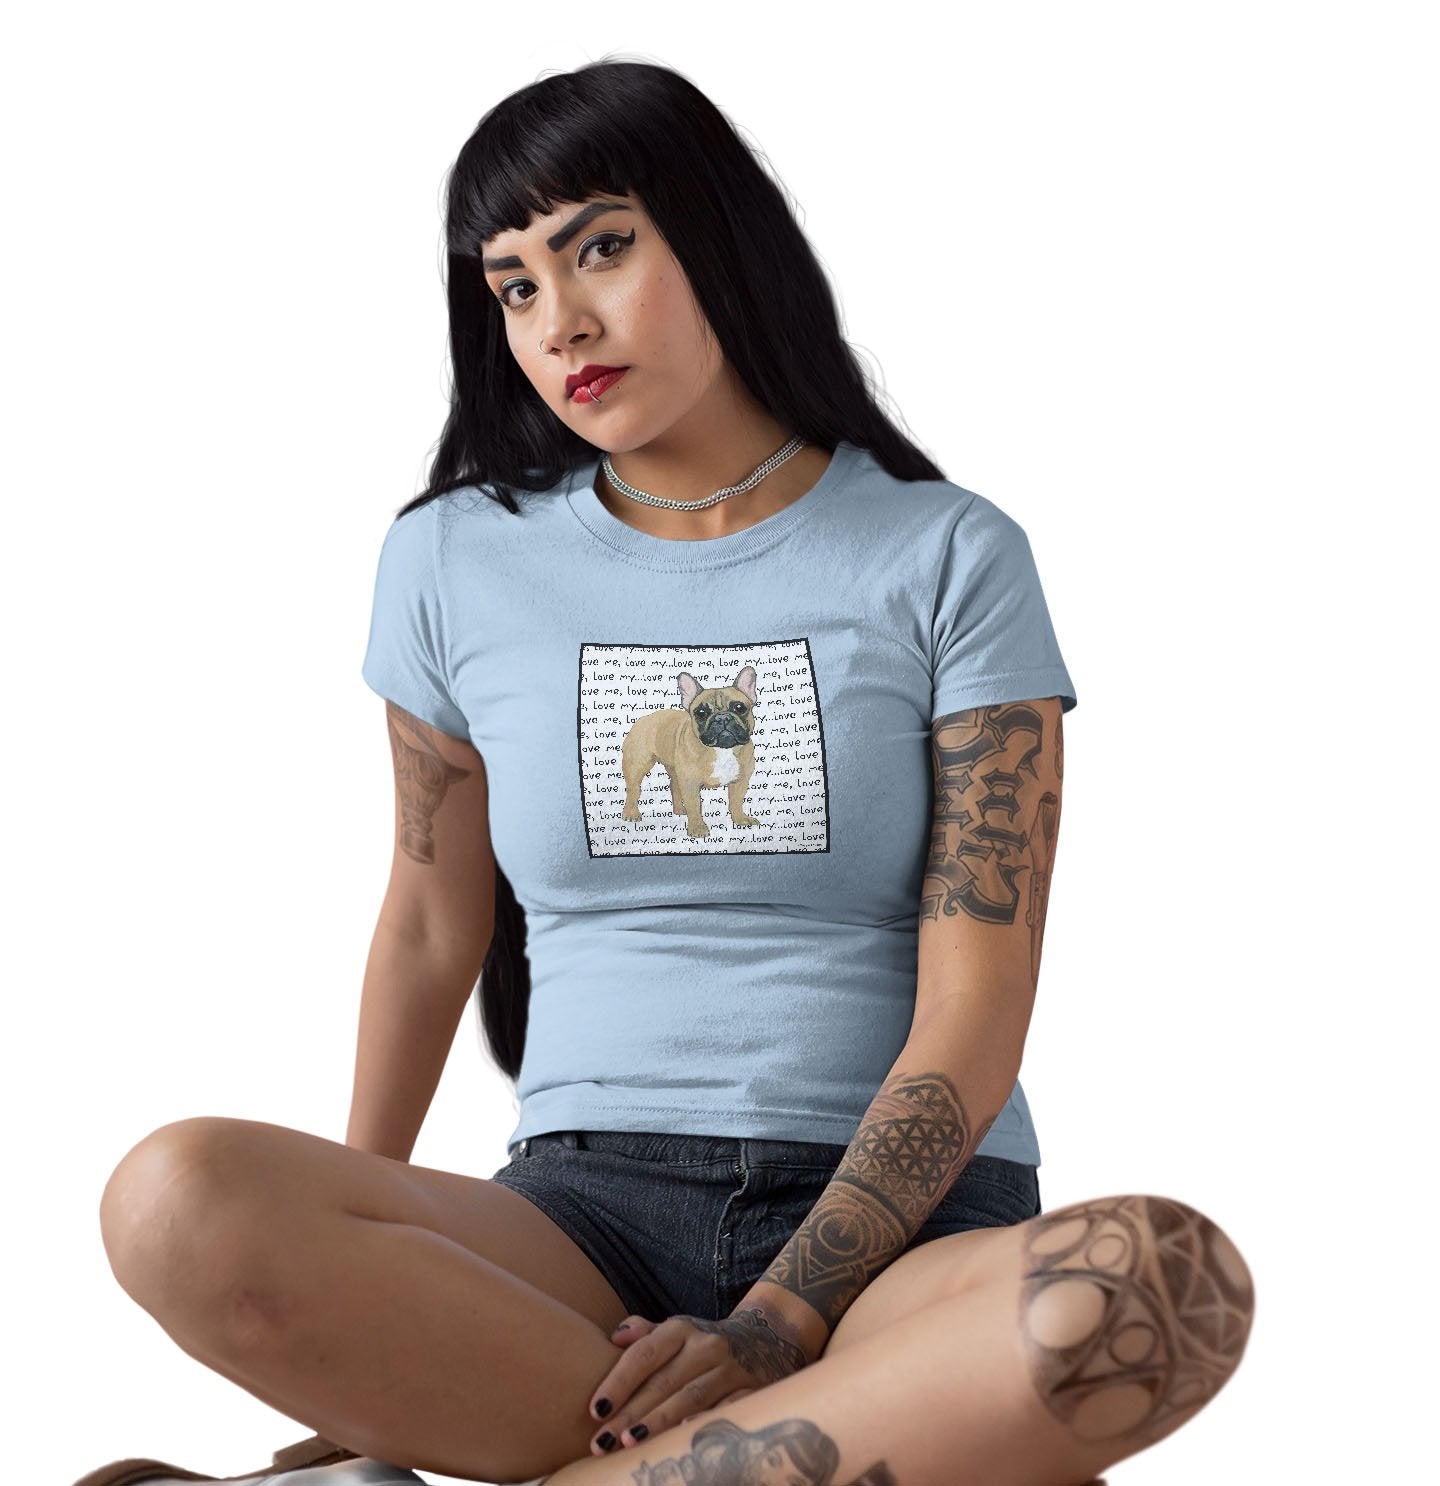 Fawn Frenchie Love Text - Women's Fitted T-Shirt